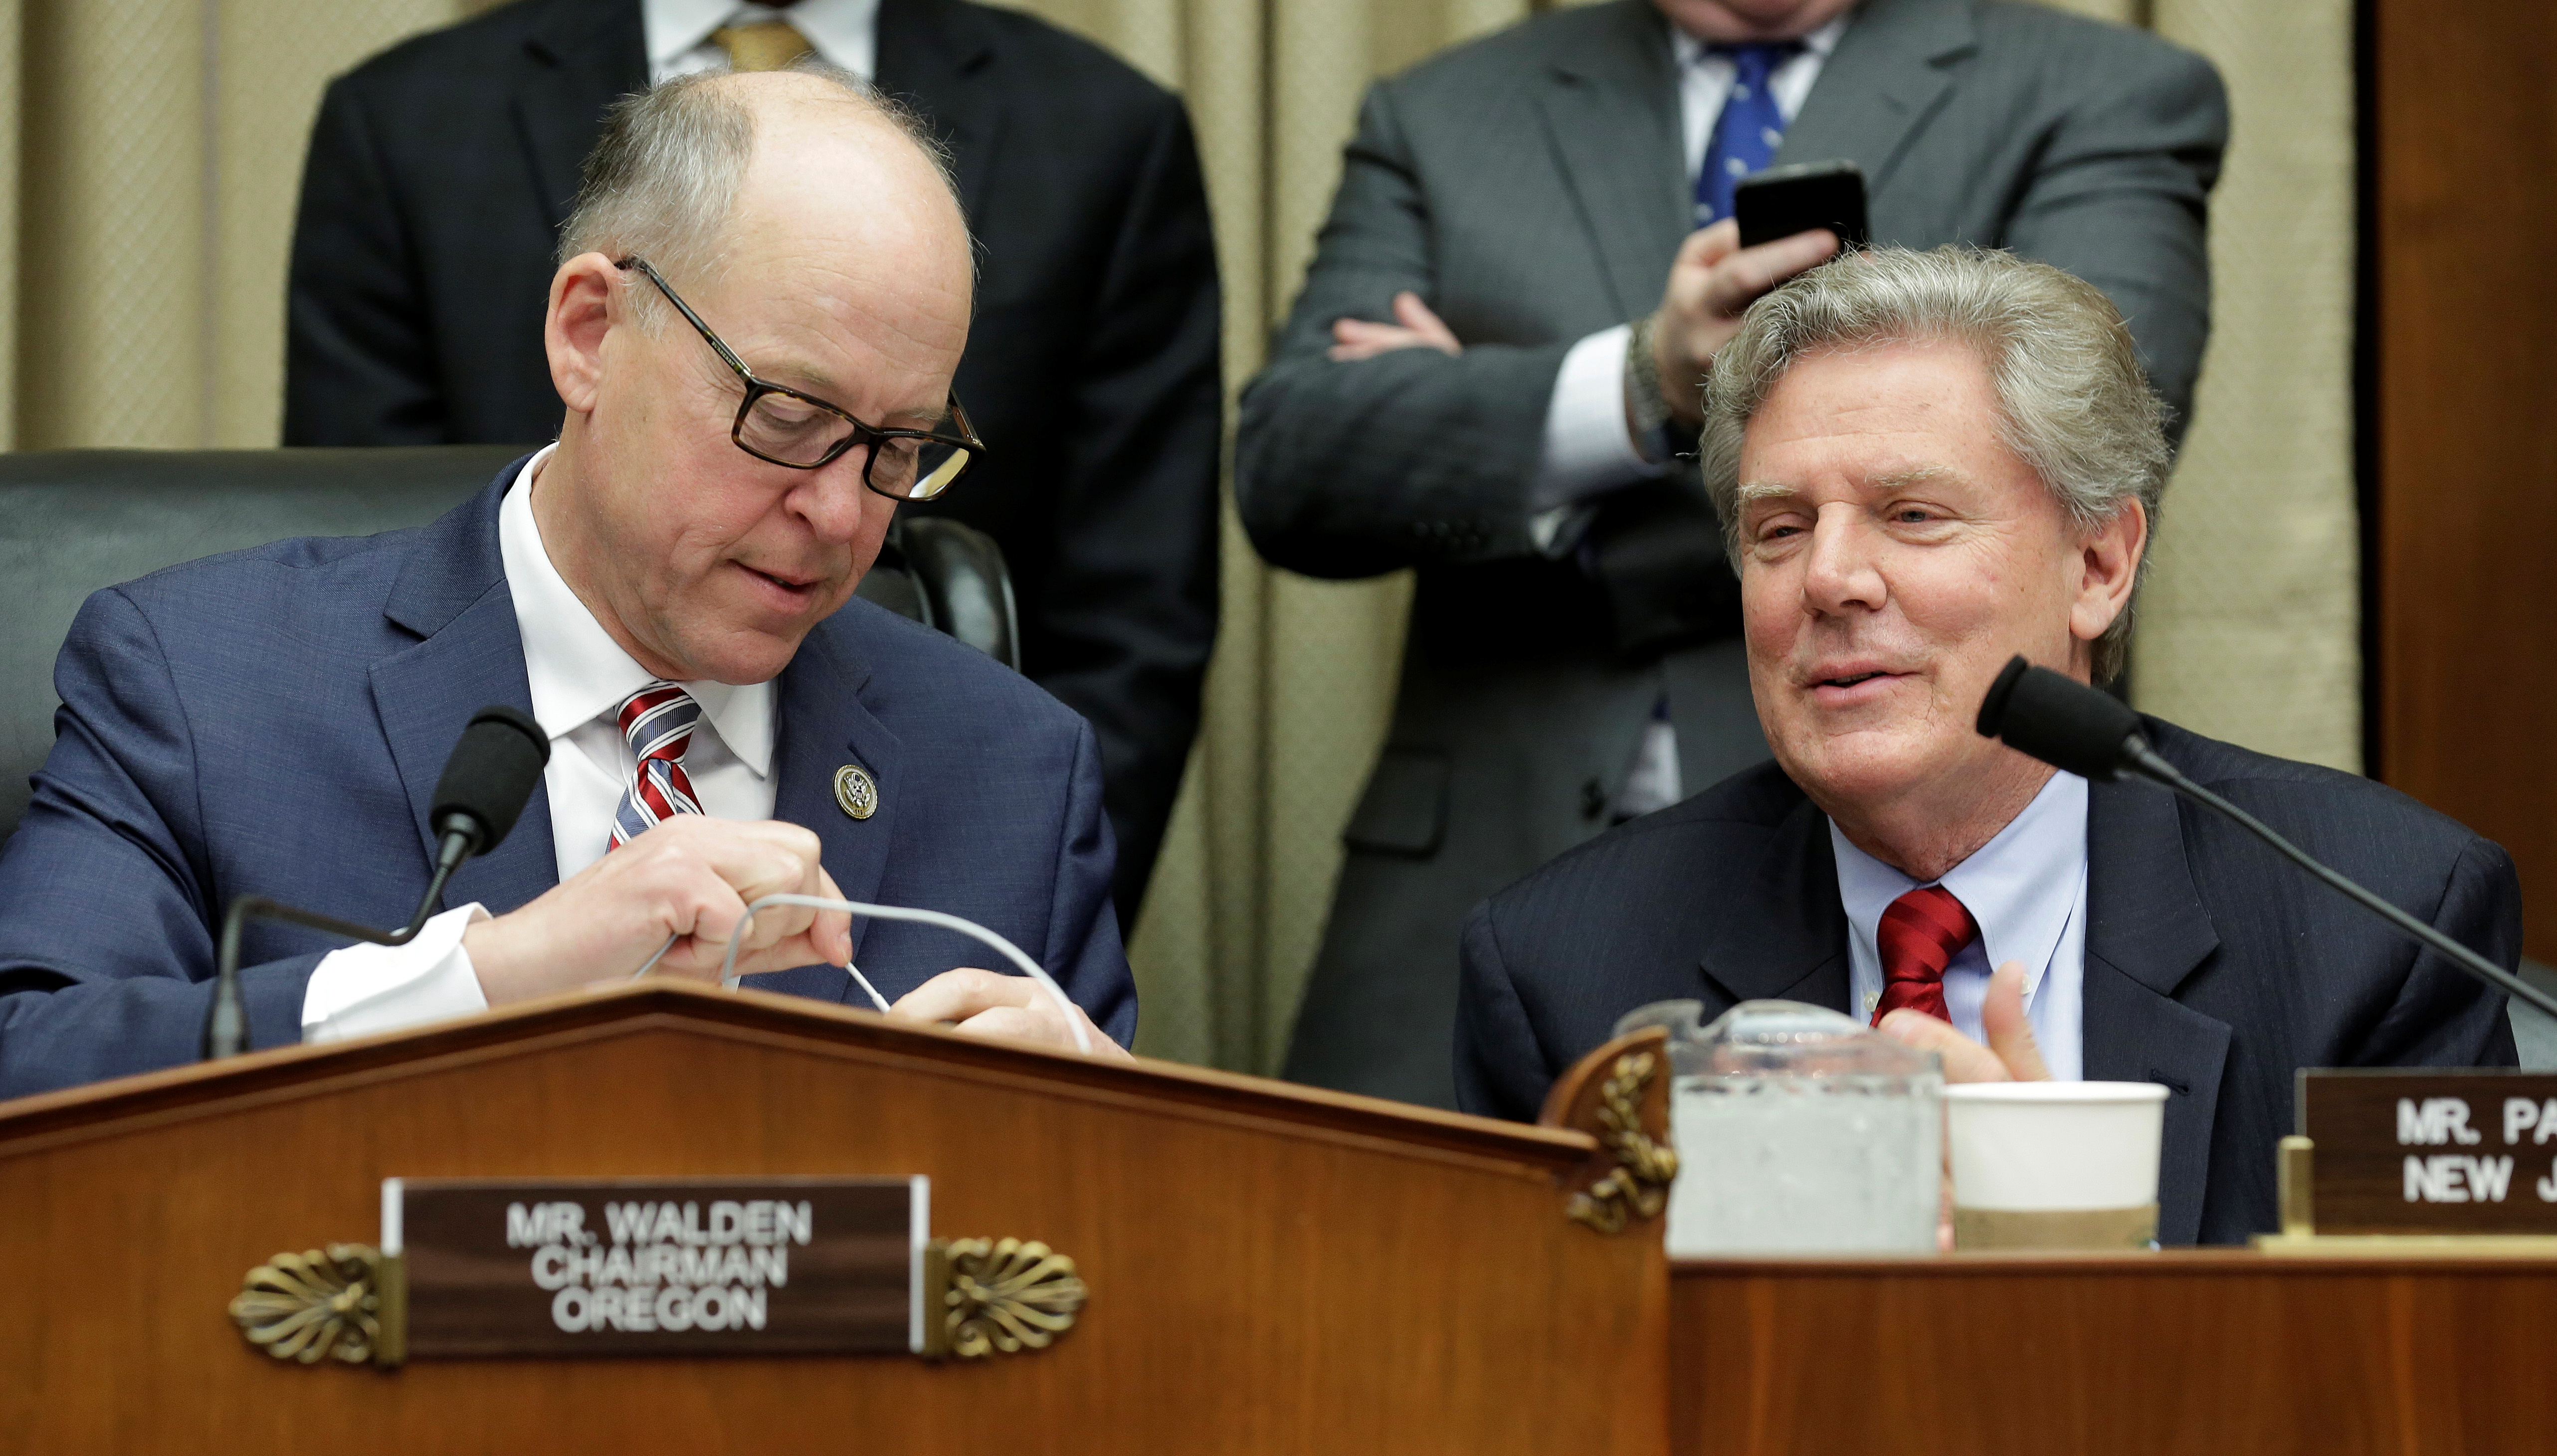 Chairman of the House Energy and Commerce Committee Greg Walden (R-OR) and ranking member Frank Pallone (D-NJ) speak during the markup of the the American Health Care Act, the Republican replacement to Obamacare, on Capitol Hill in Washington